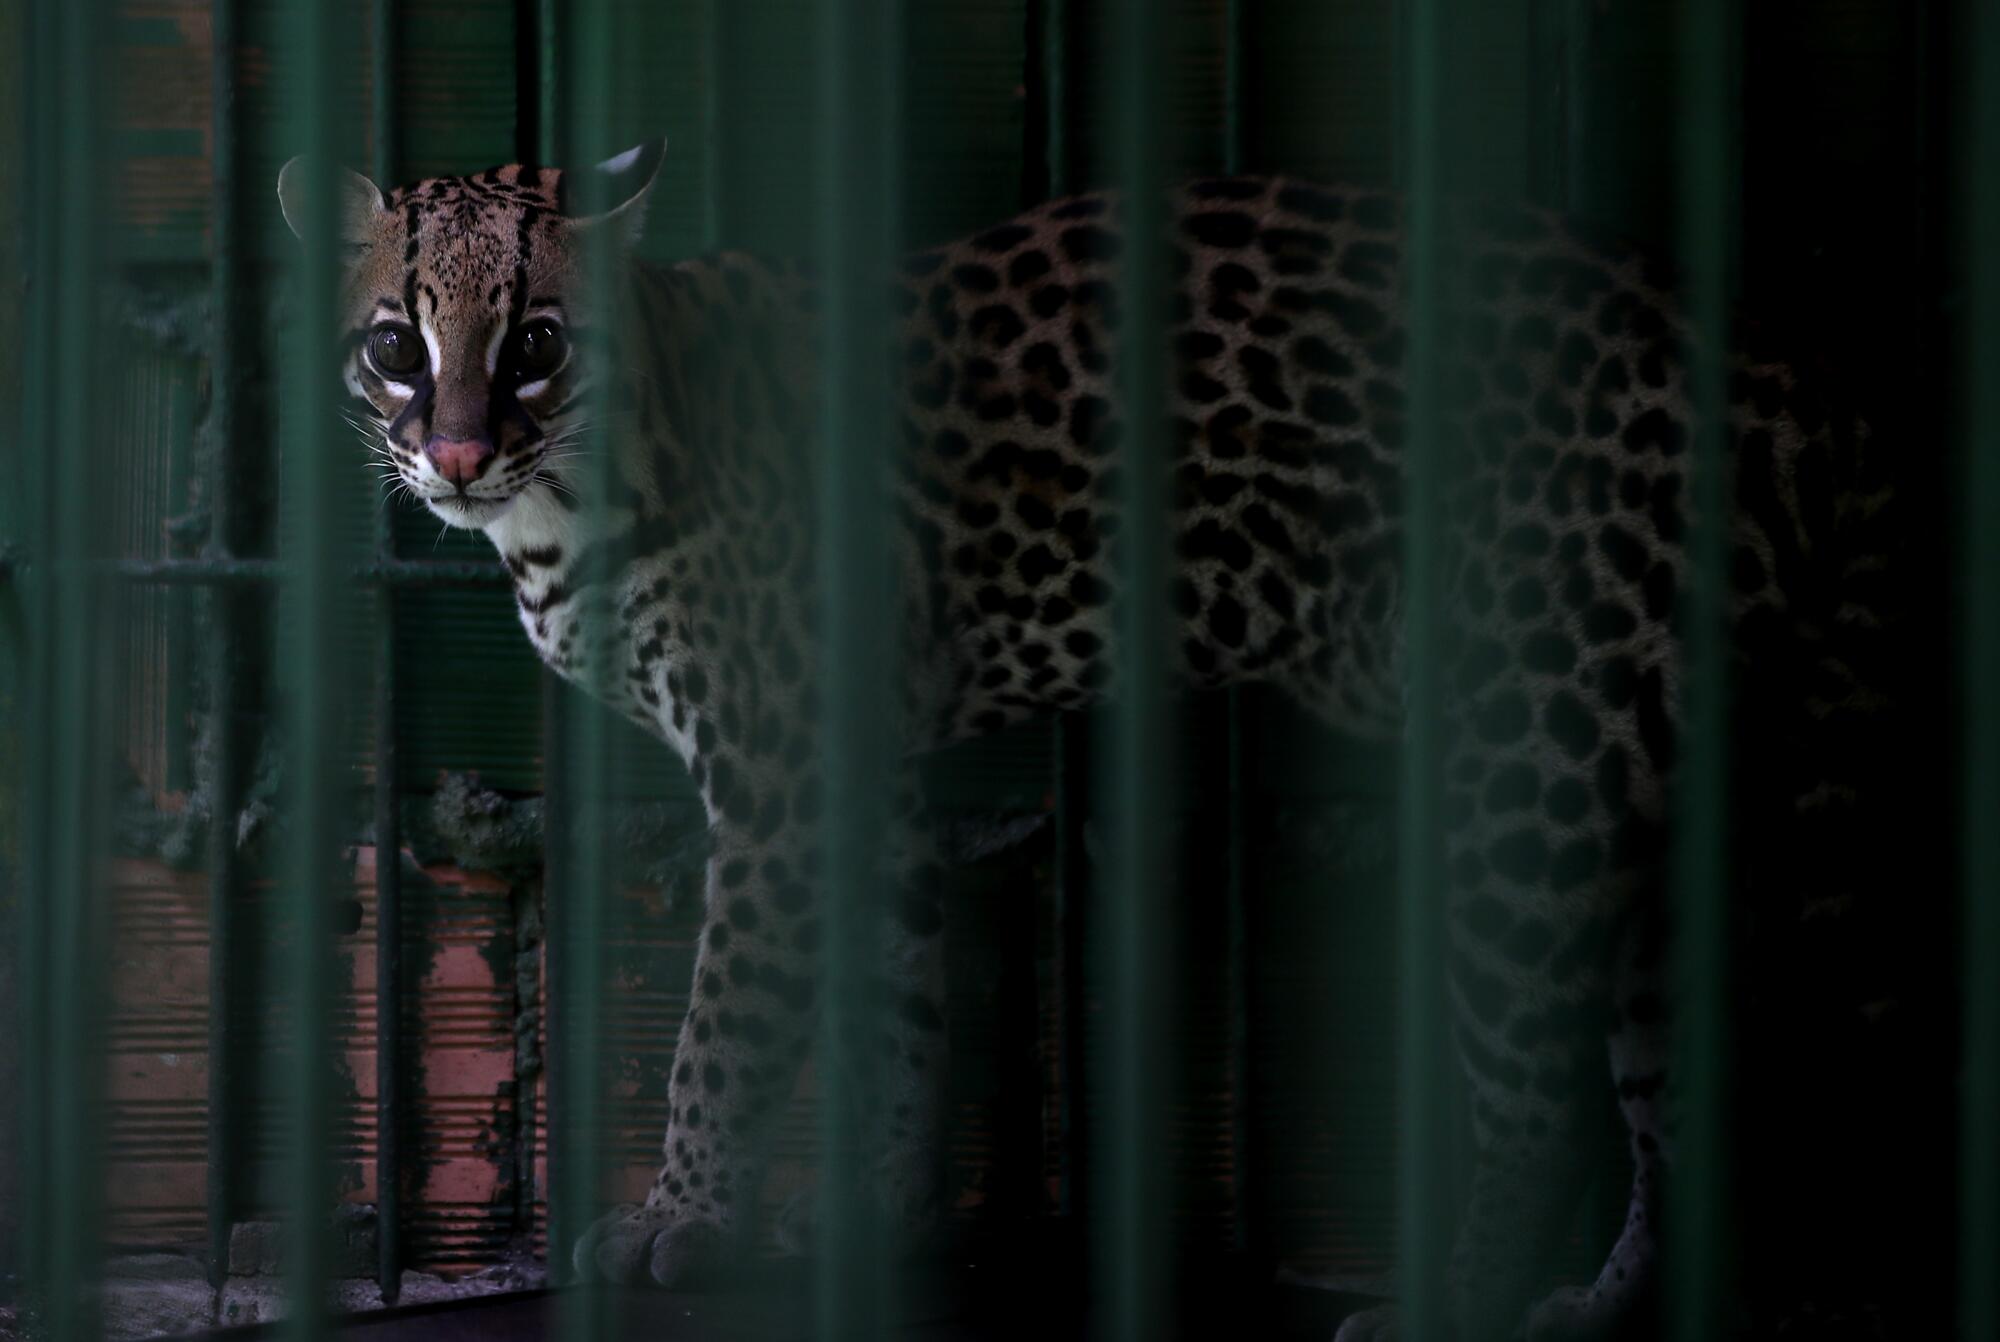 An ocelot in a cage  